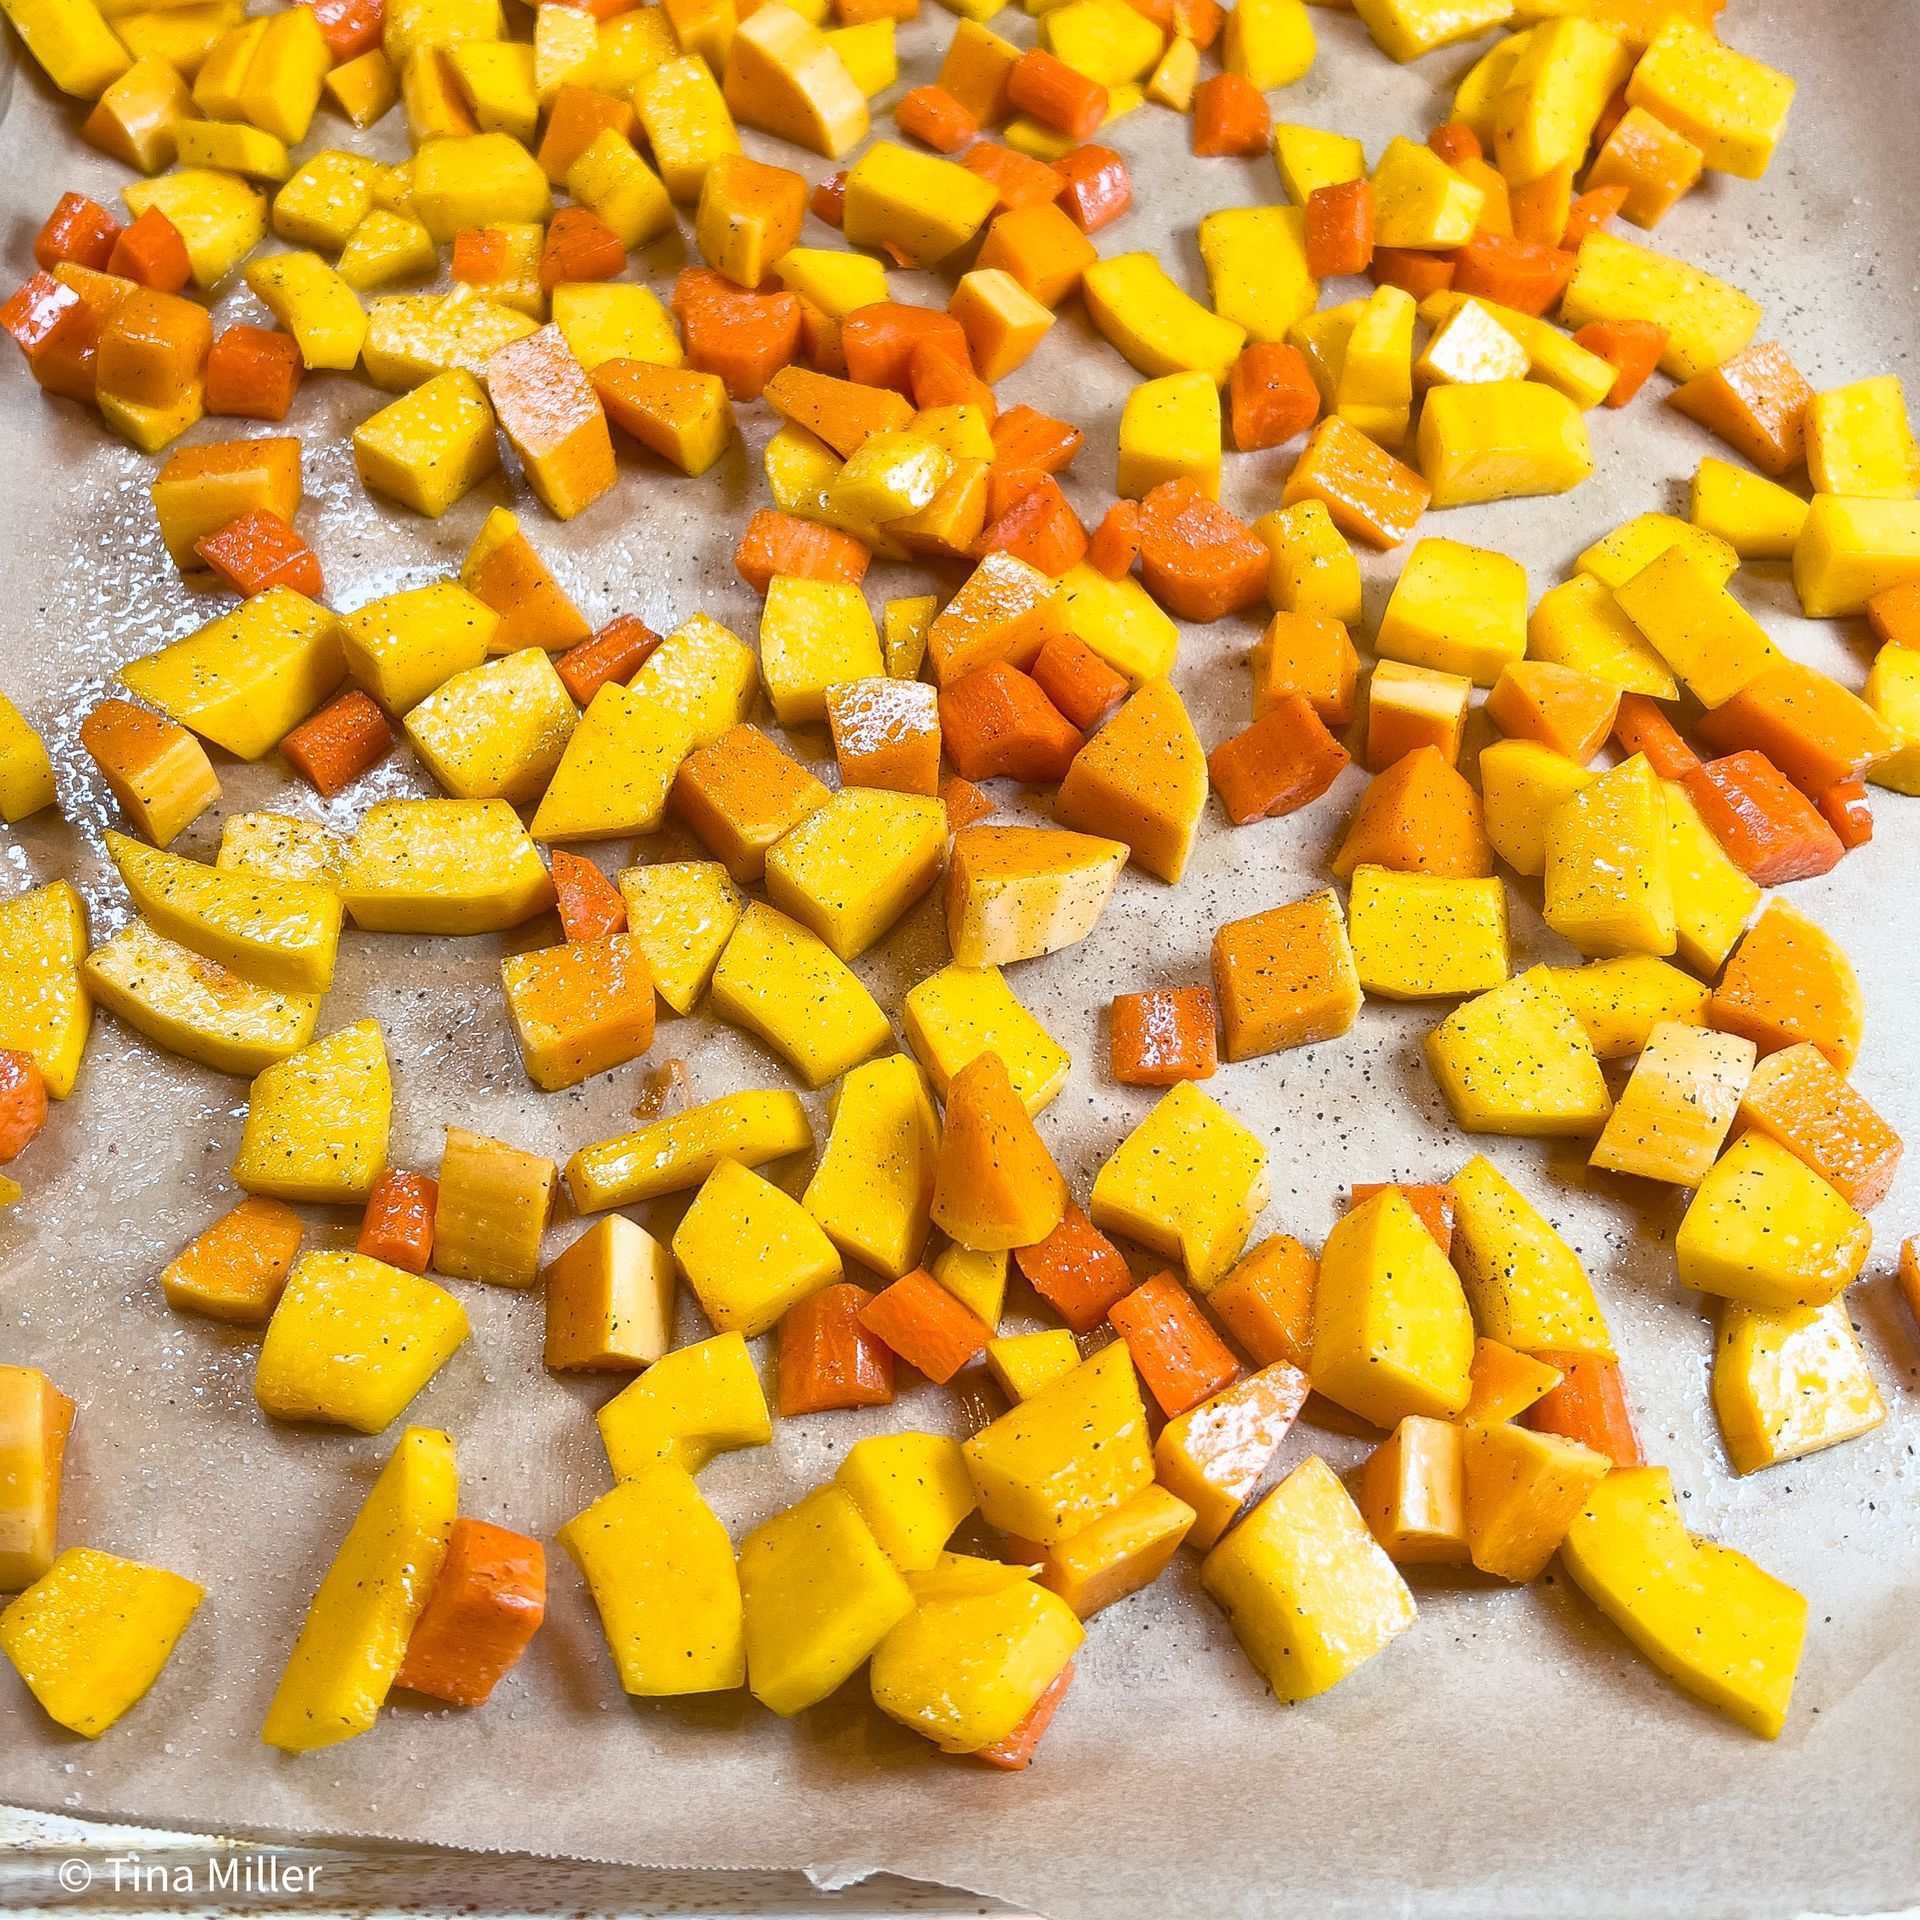 Candy squash, butternut squash, and carrots chopped on a sheet of parchment paper and laying in a single layer on a sheet pan topped with olive oil, salt, and pepper.